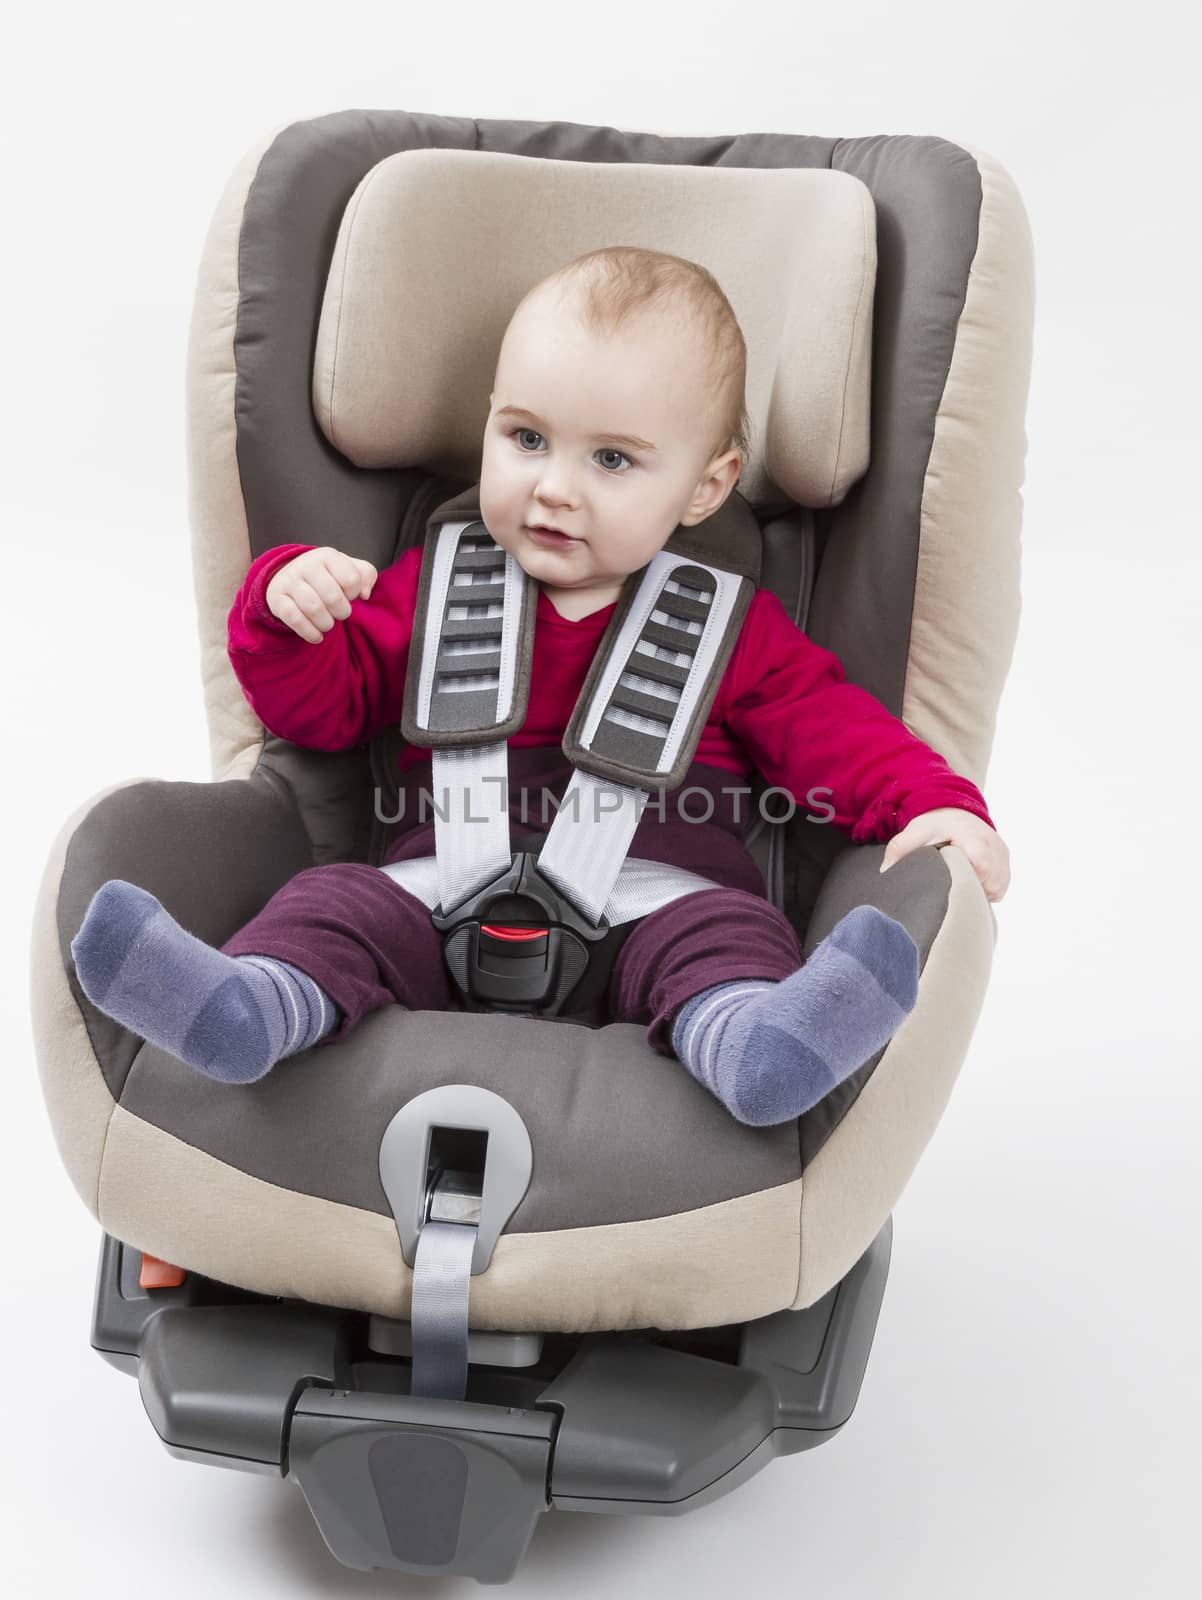 young child booster seat for a car by gewoldi